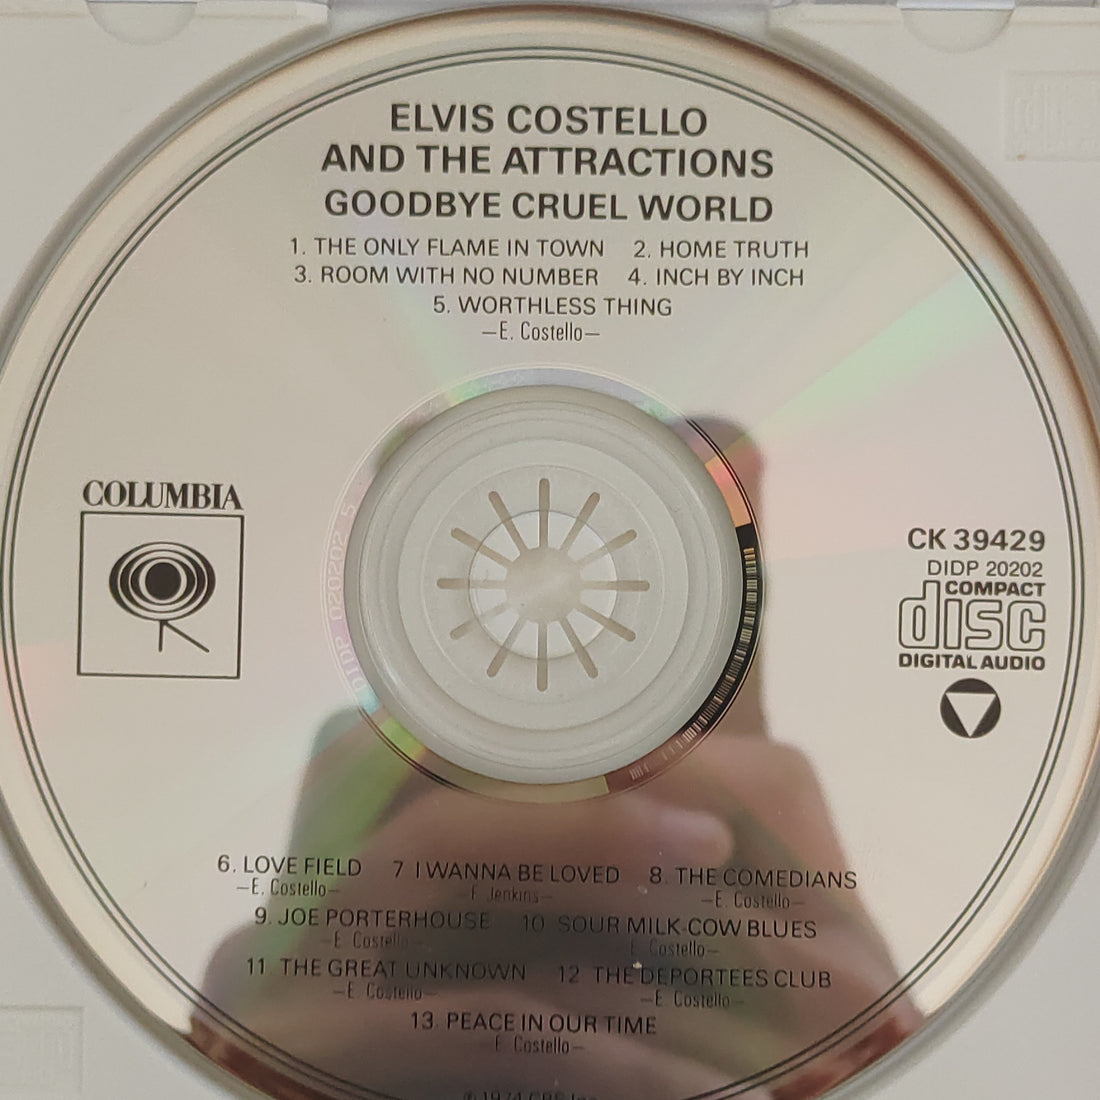 Elvis Costello & The Attractions - Goodbye Cruel World (CD) (NM or M-)